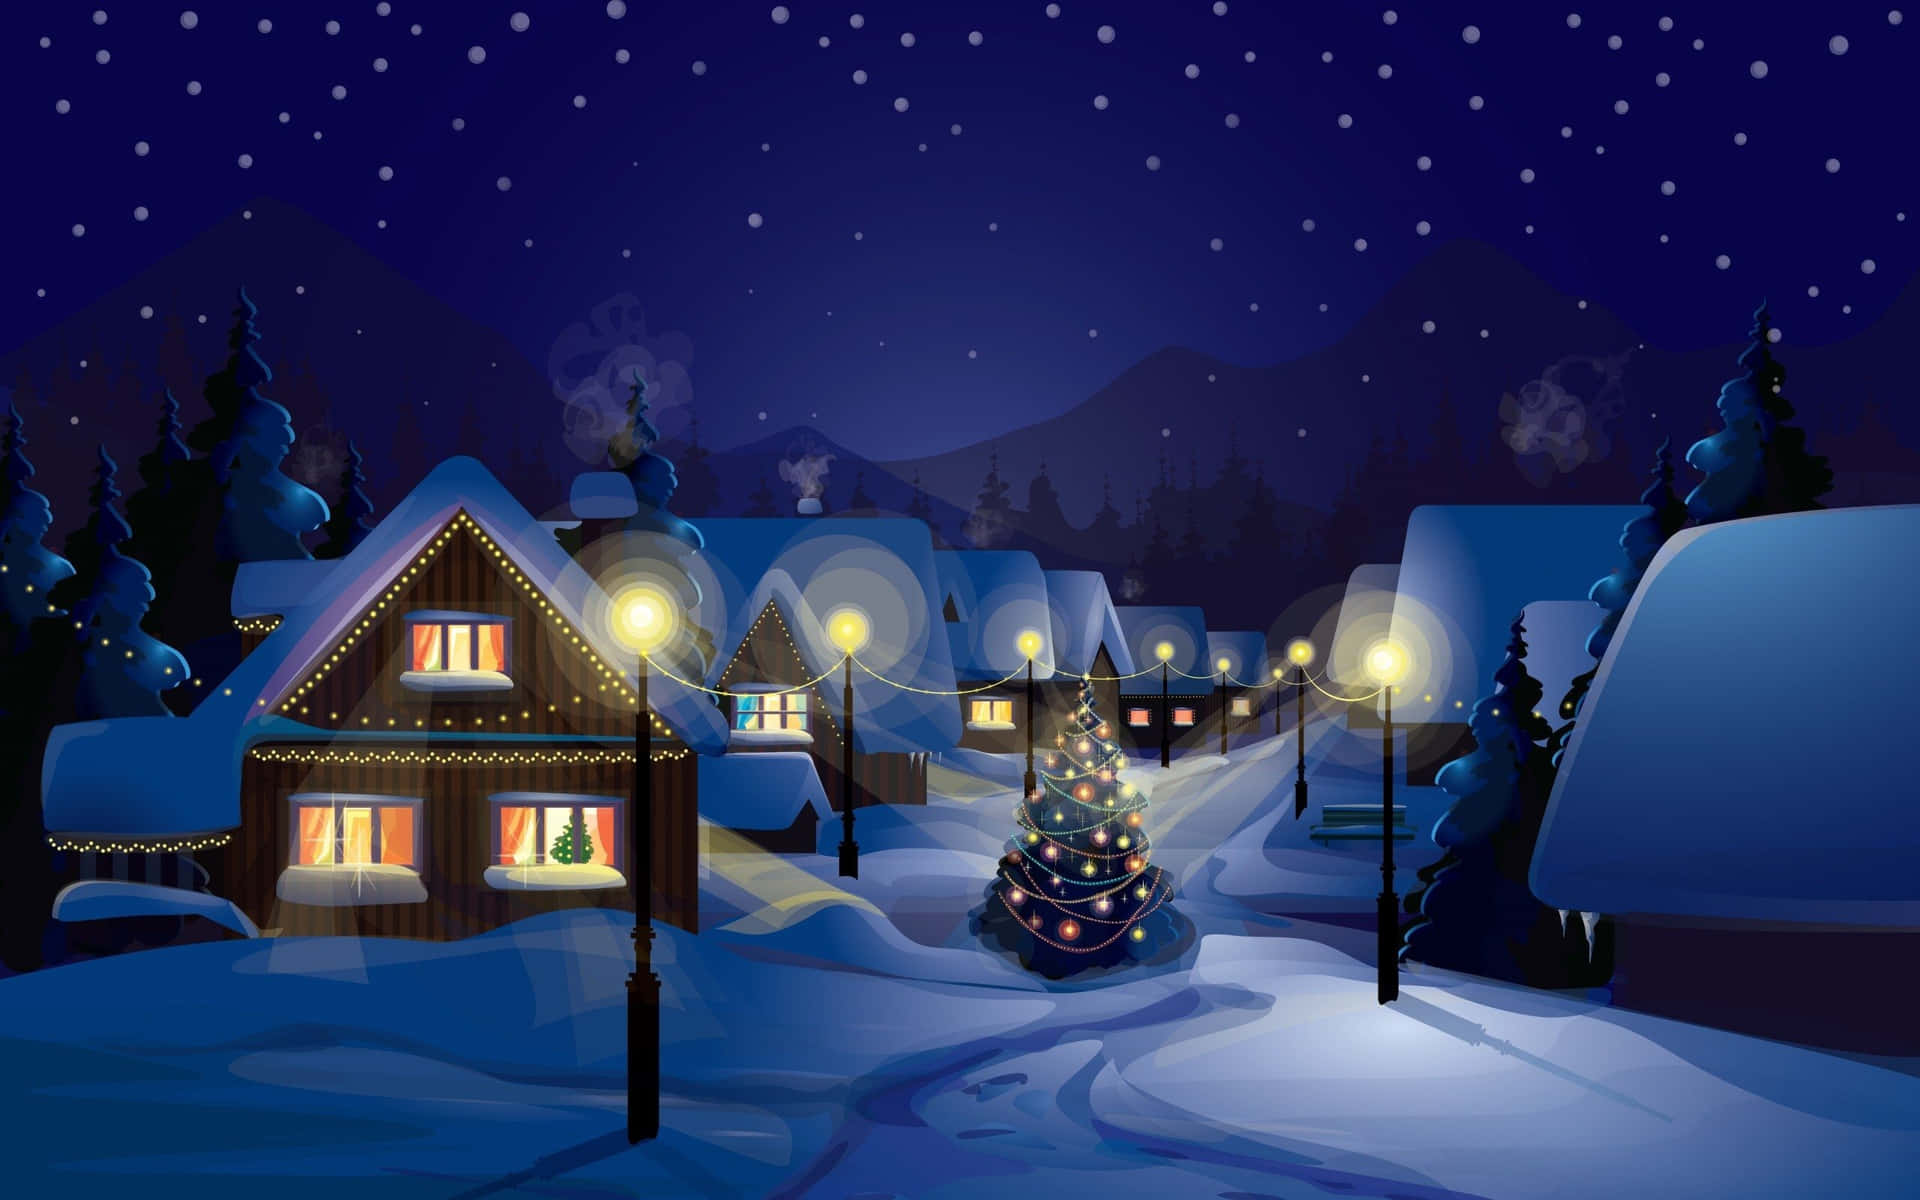 “A picturesque Christmas village full of festive cheer.” Wallpaper